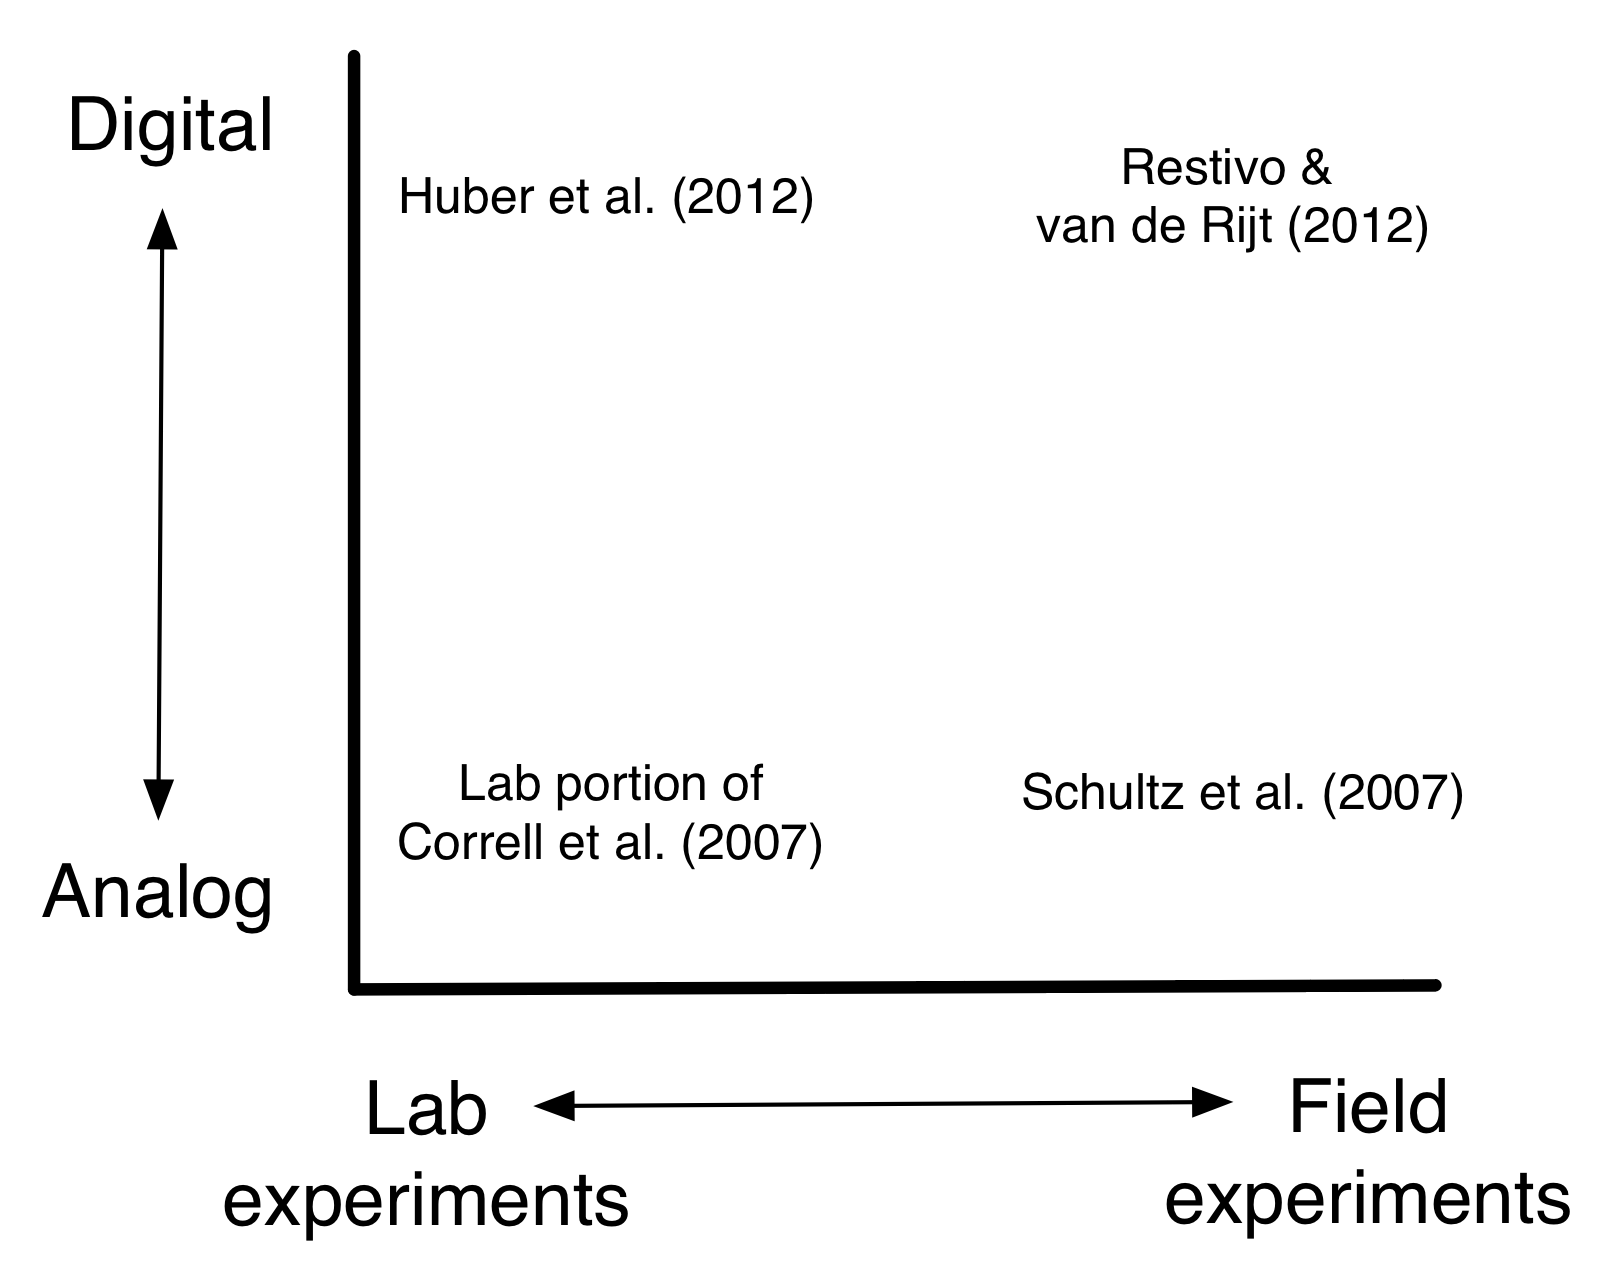 Figure 4.1: Schematic of design space for experiments. In the past, experiments varied along the lab-field dimension. Now, they also vary on the analog-digital dimension. This two-dimensional design space is illustrated by four experiments that I describe in this chapter. In my opinion, the area of greatest opportunity is digital field experiments.